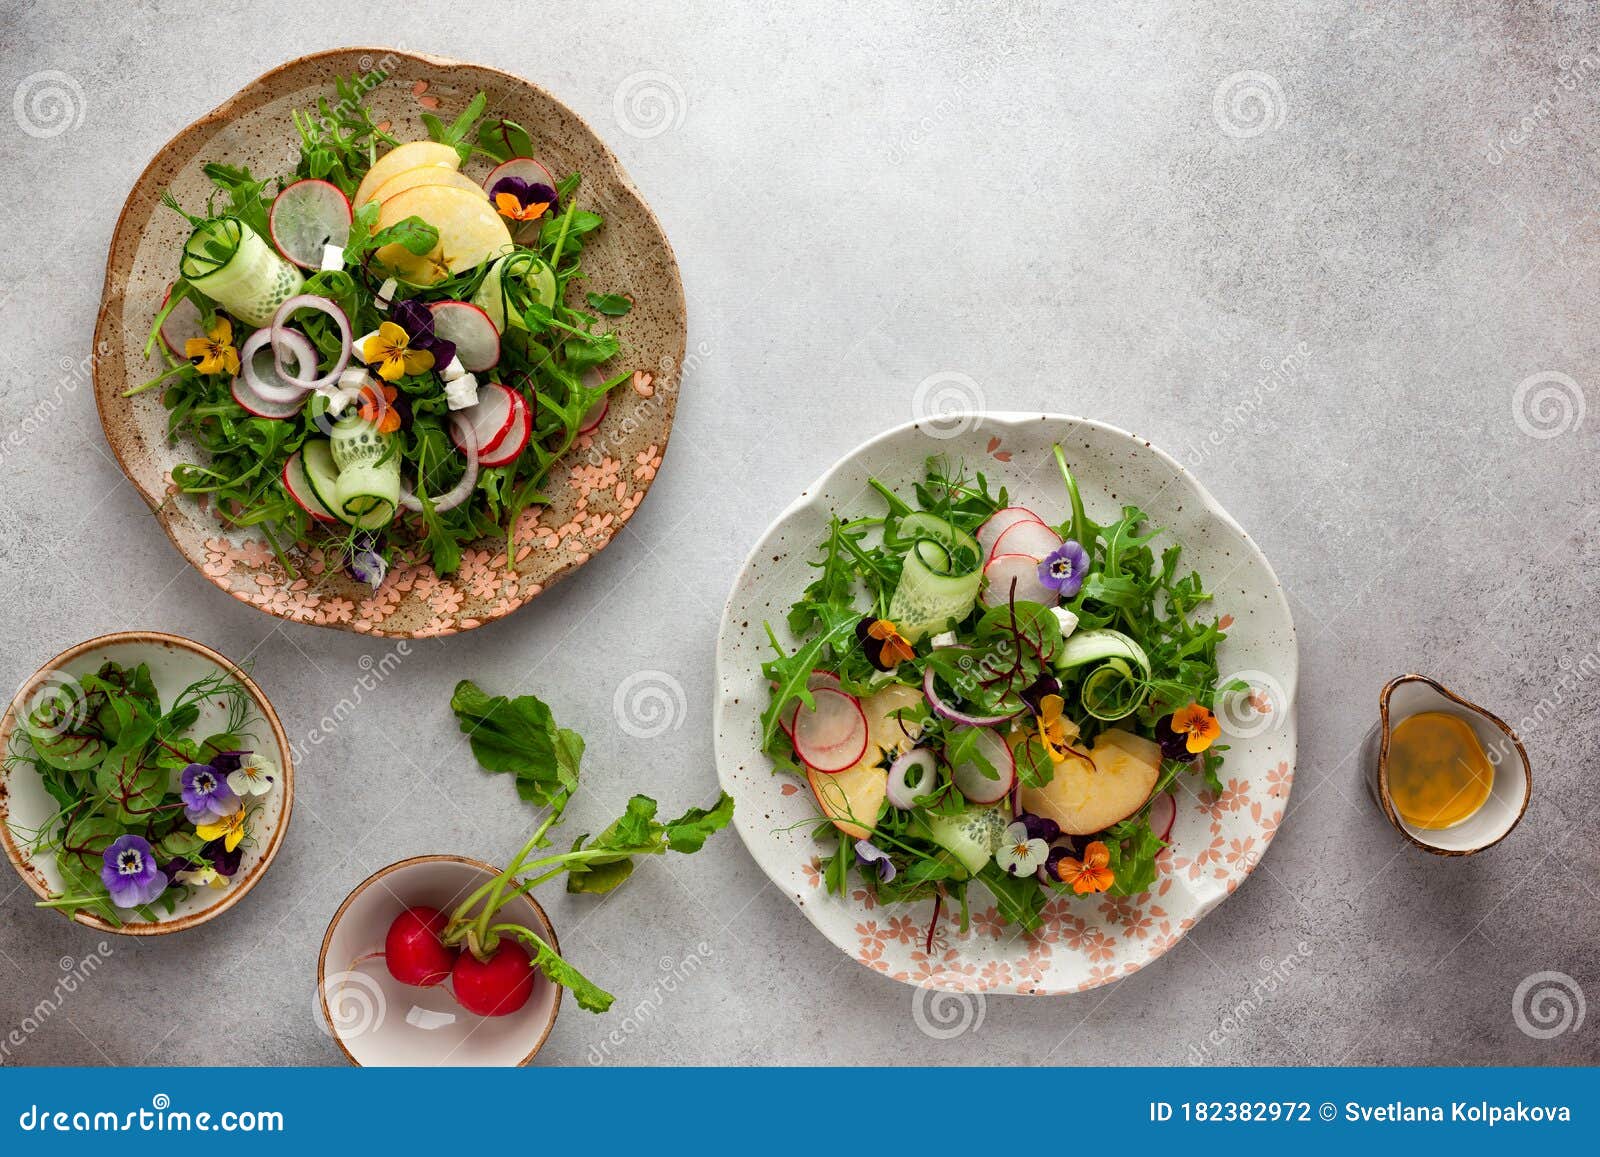 Delicious Summer Salad With Edible Flowers Vegetables Fruit Micro Greens And Cheese On A Vintage Grey Background Flat Lay Top Stock Photo Image Of Apple Ceramic 182382972